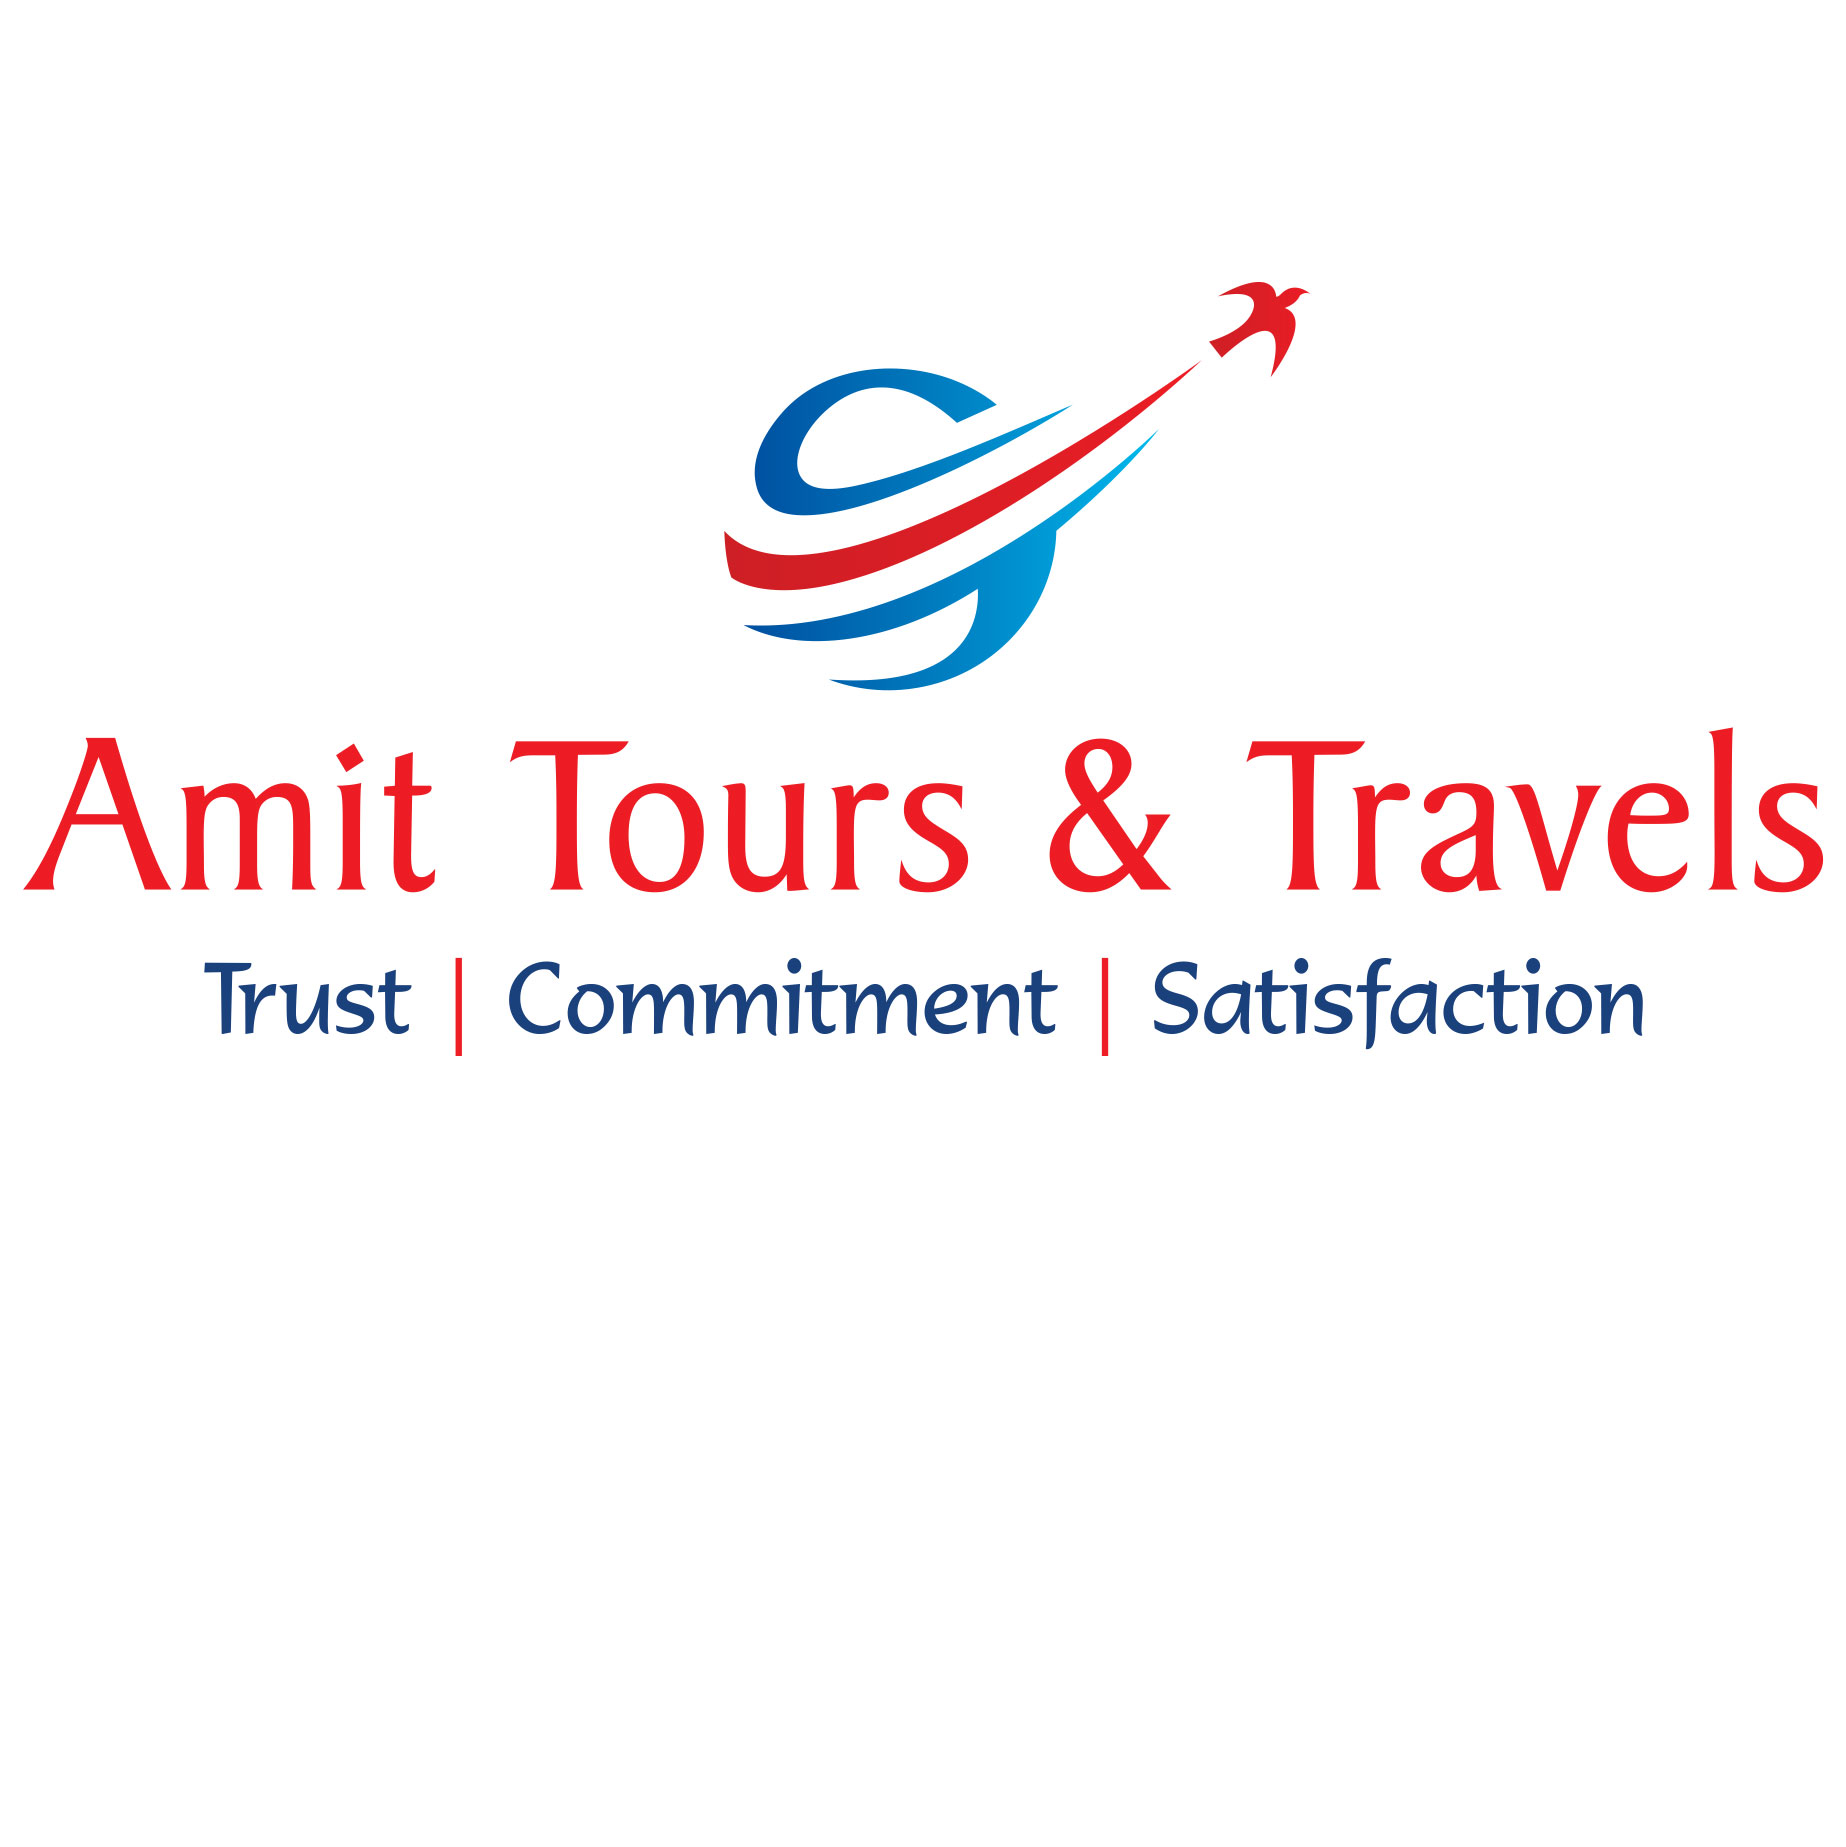 Amit Tours and Travels